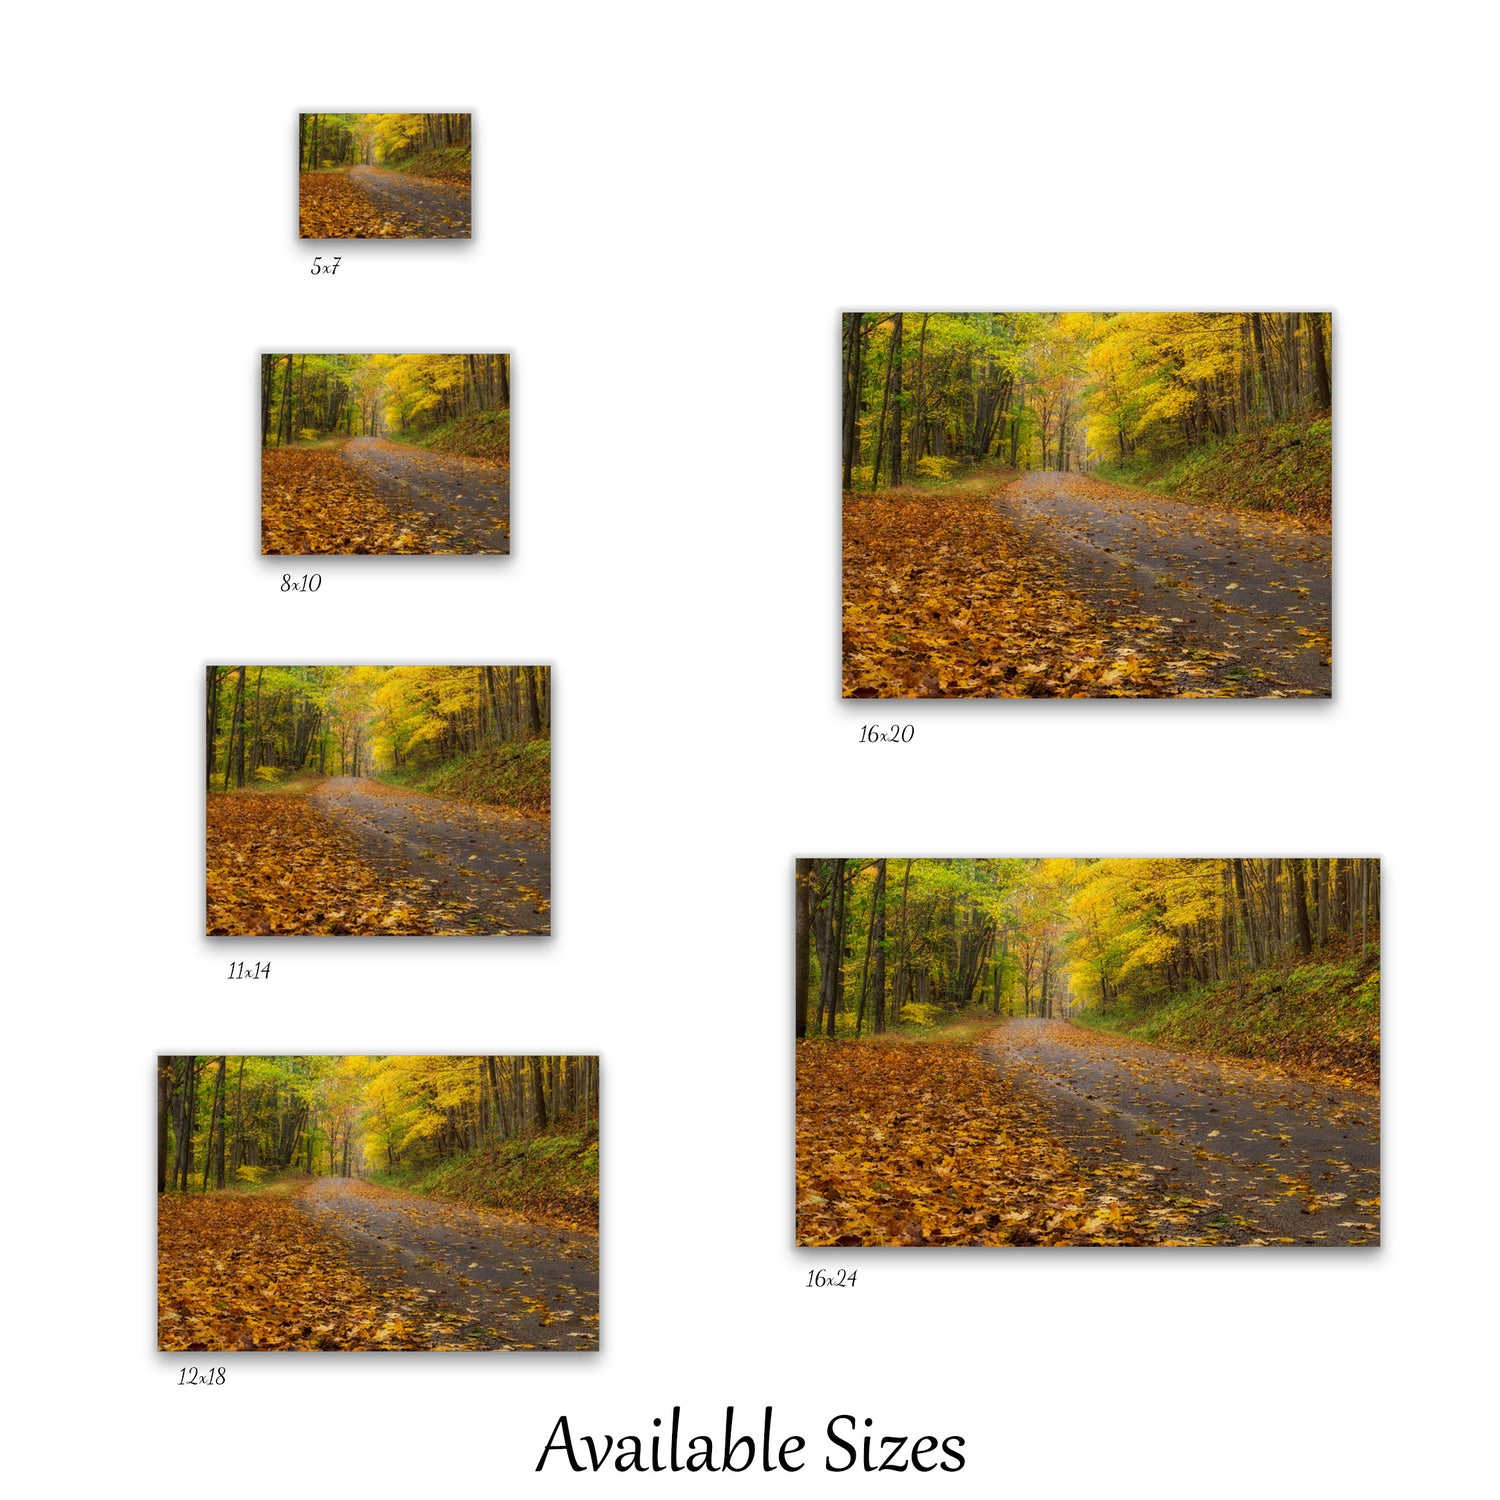 Visual representation of fall photography wall art print sizes available: 5x7, 8x10, 11x14, 12x18, 16x20, and 16x24.